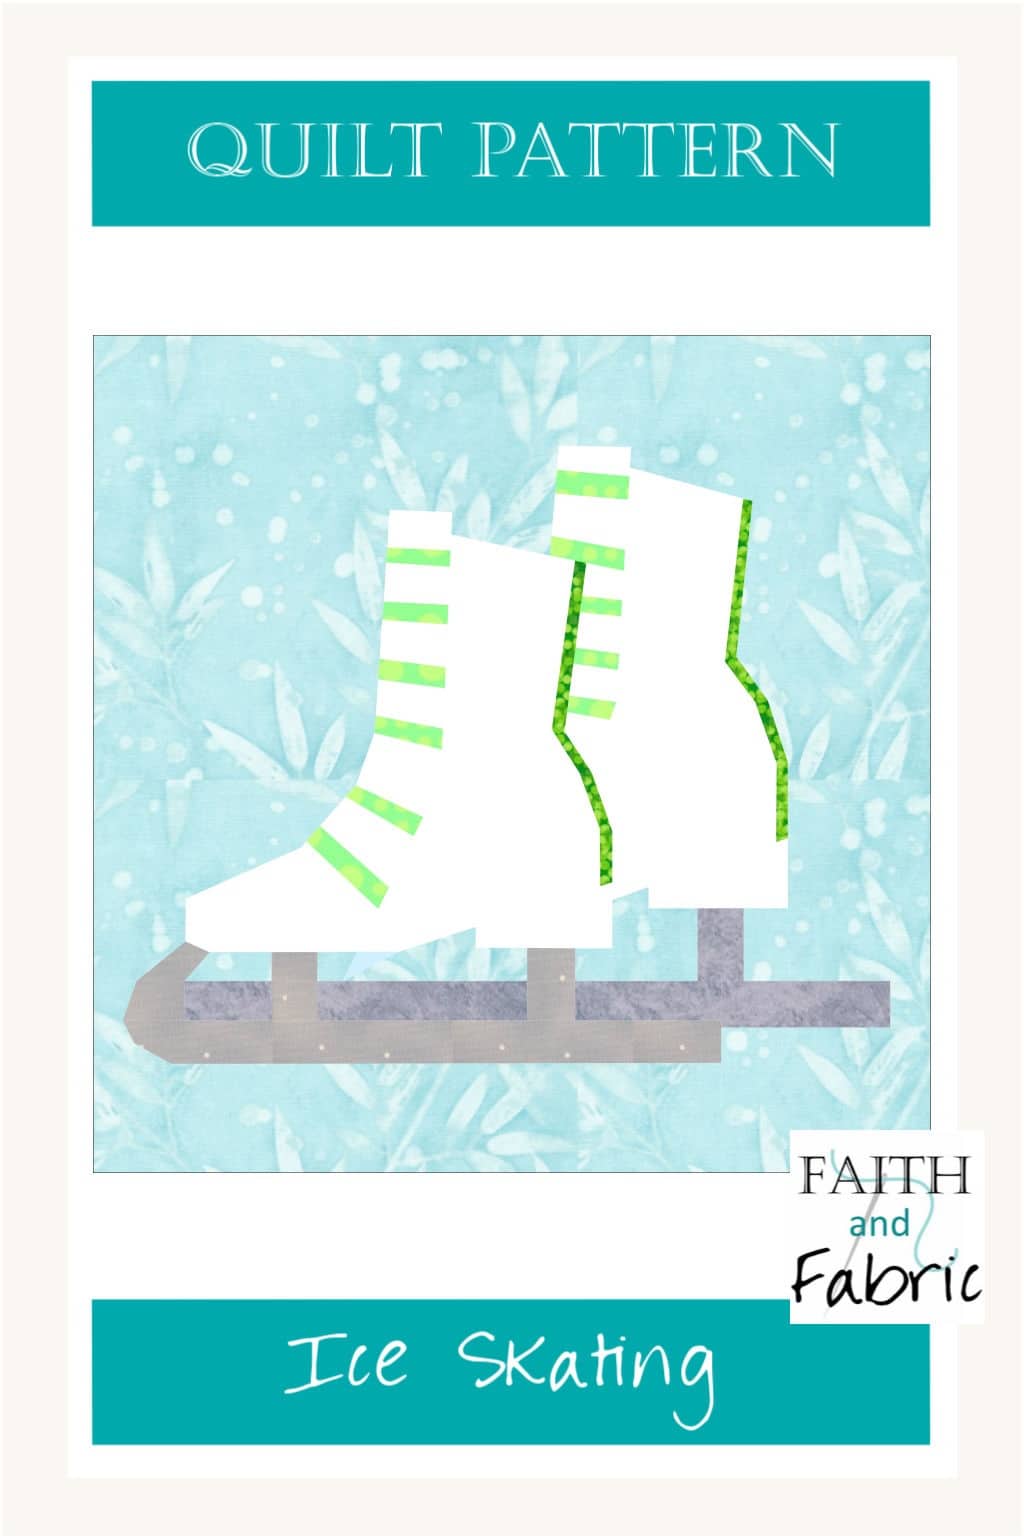 This quilt is ready for winter! With ice skates made either for the ice rink or for a game of ice hockey, your colors will transform them to whatever you like! Created by Faith and Fabric